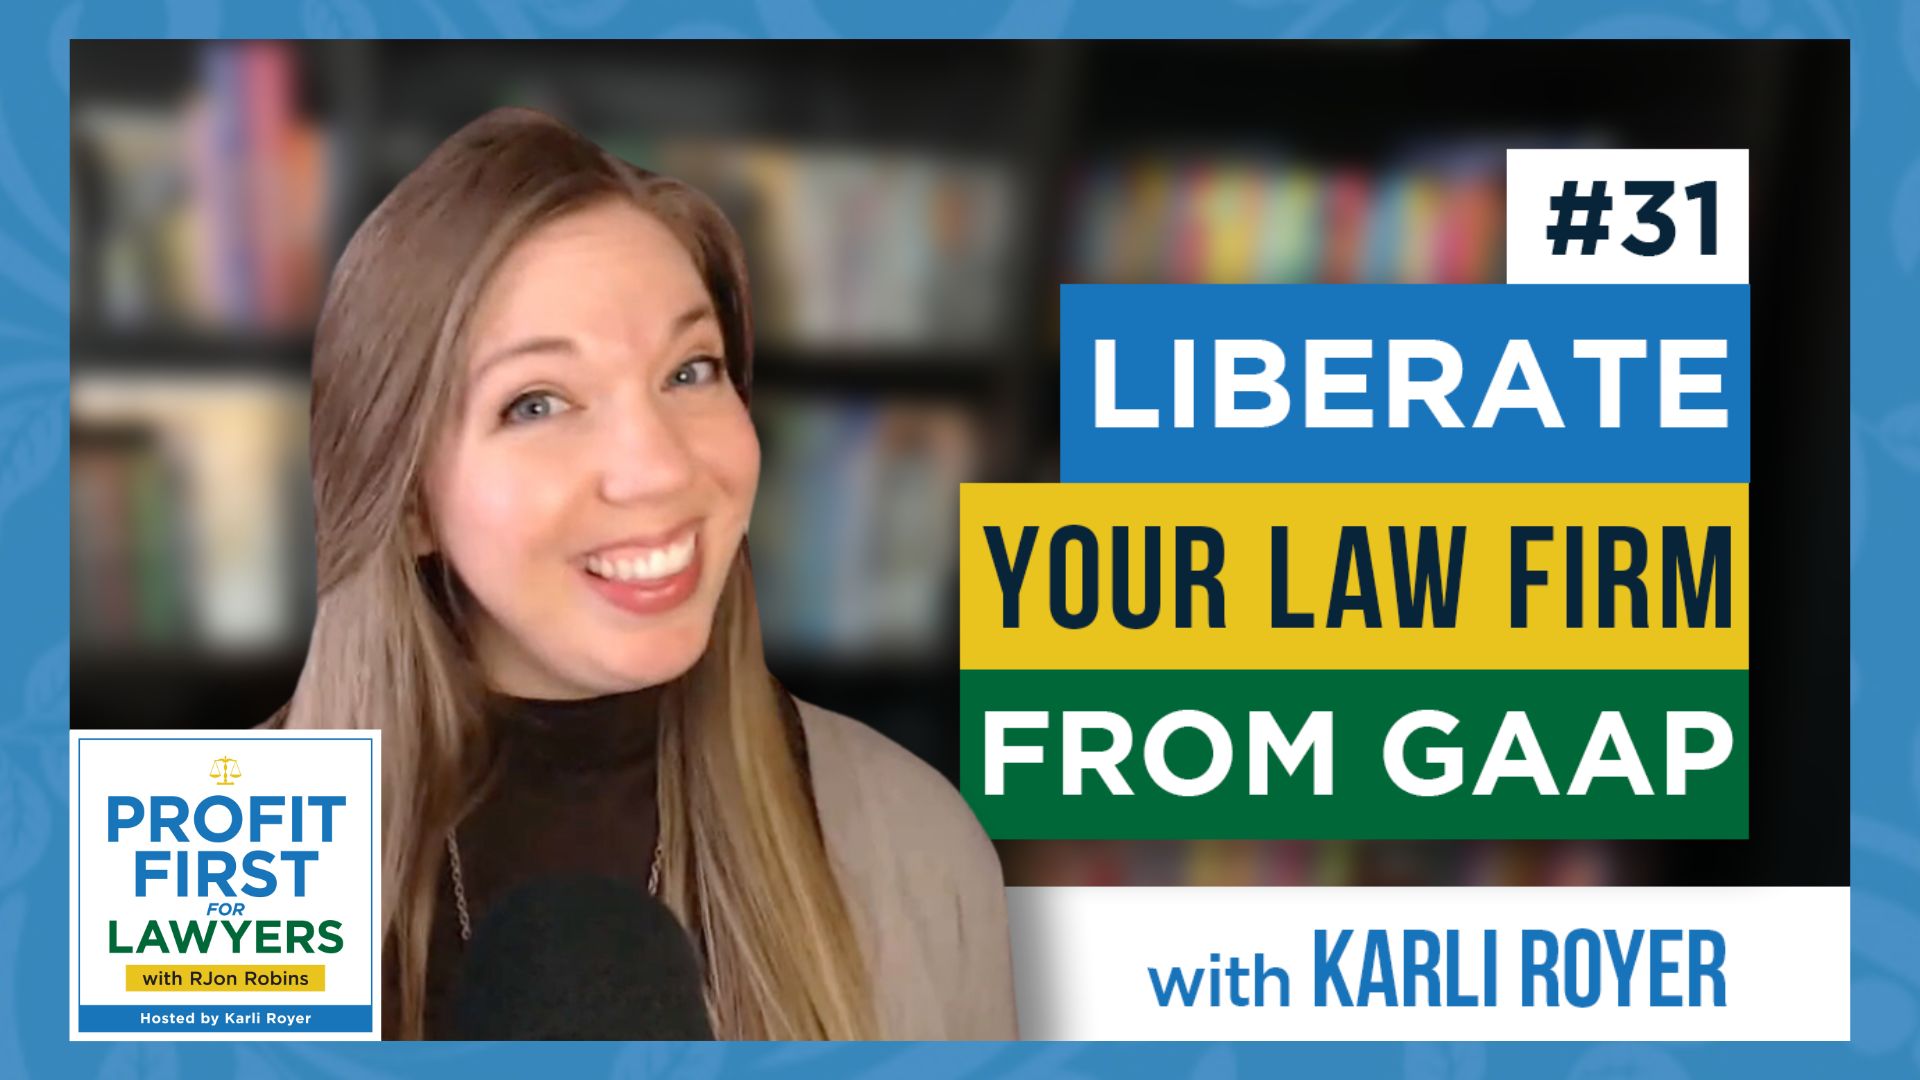 Ep 31 Liberate Your Law Firm From GAAP featured image shows Karli Royer, host of the Profit First For Lawyers podcast head angled to the side smiling and looking forward.